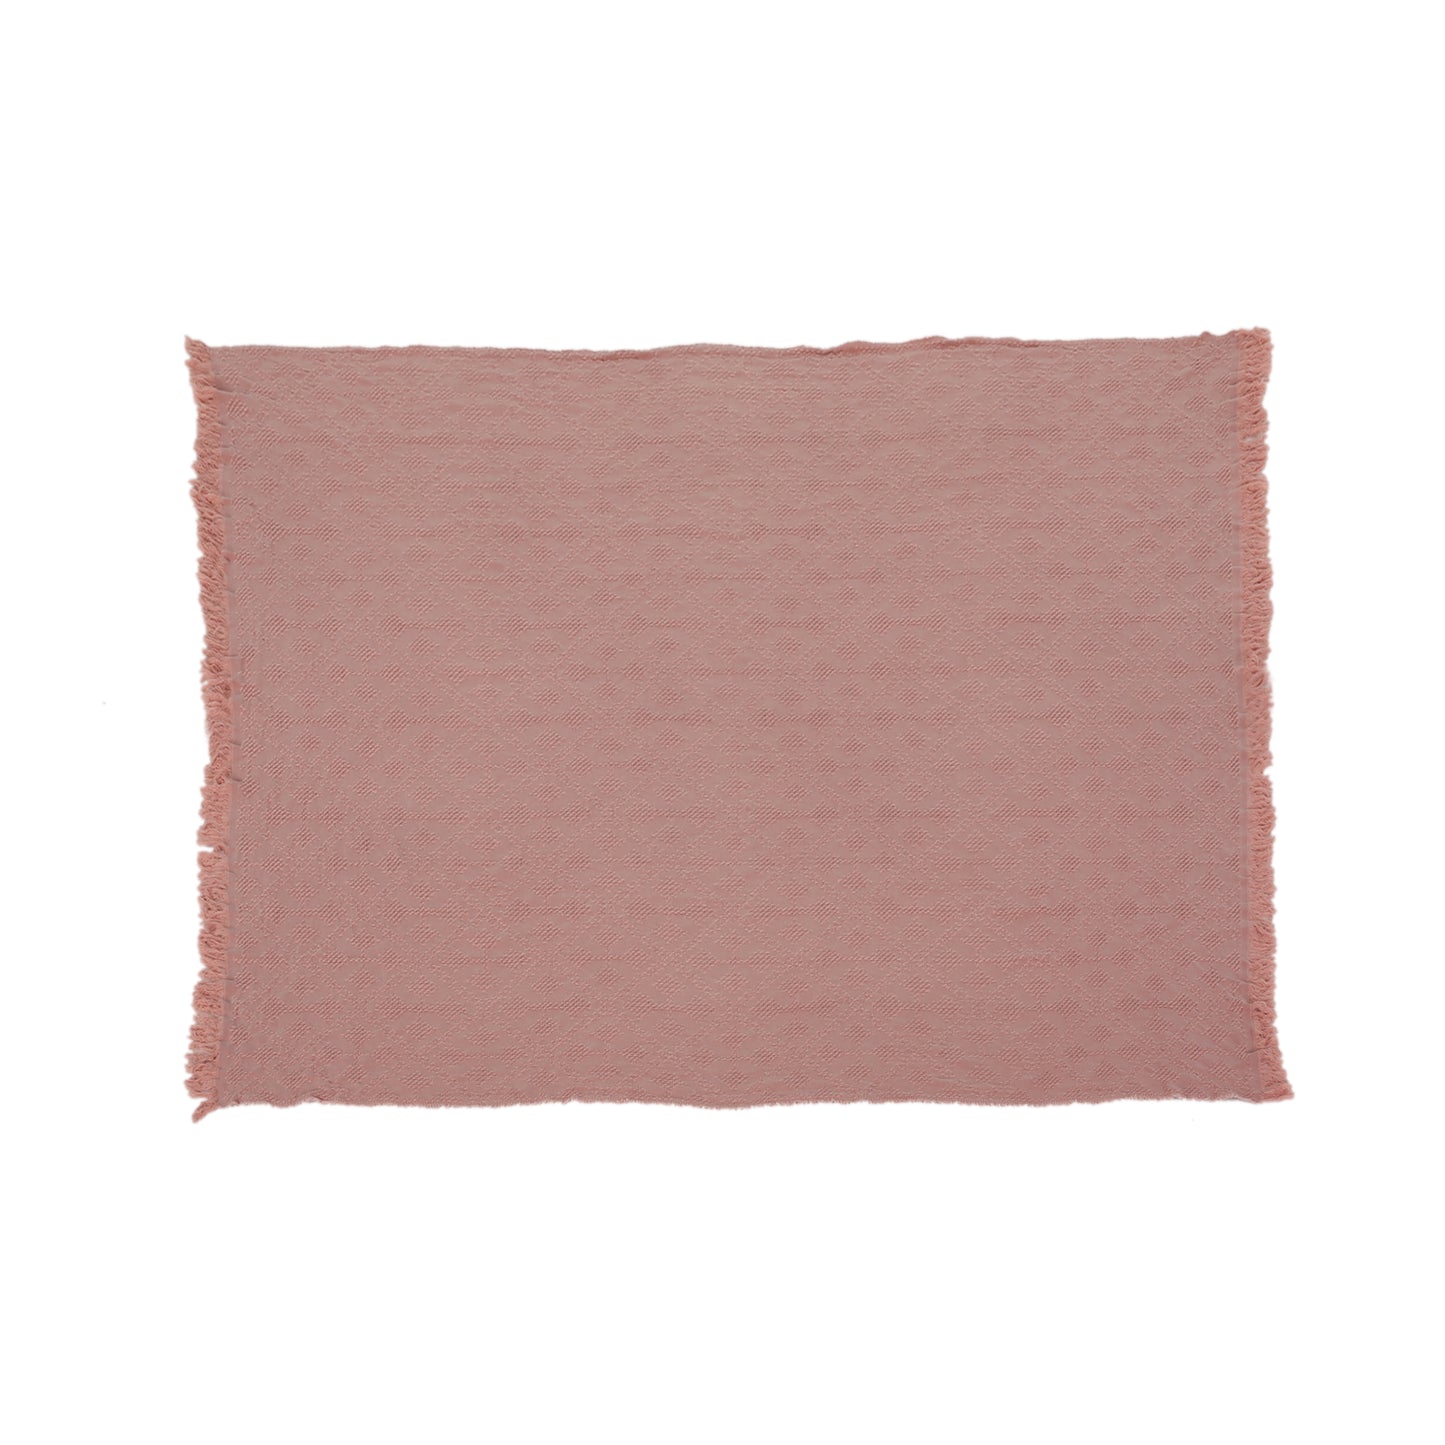 Fontana Contemporary Cotton Throw Blanket with Fringes, Dusty Pink